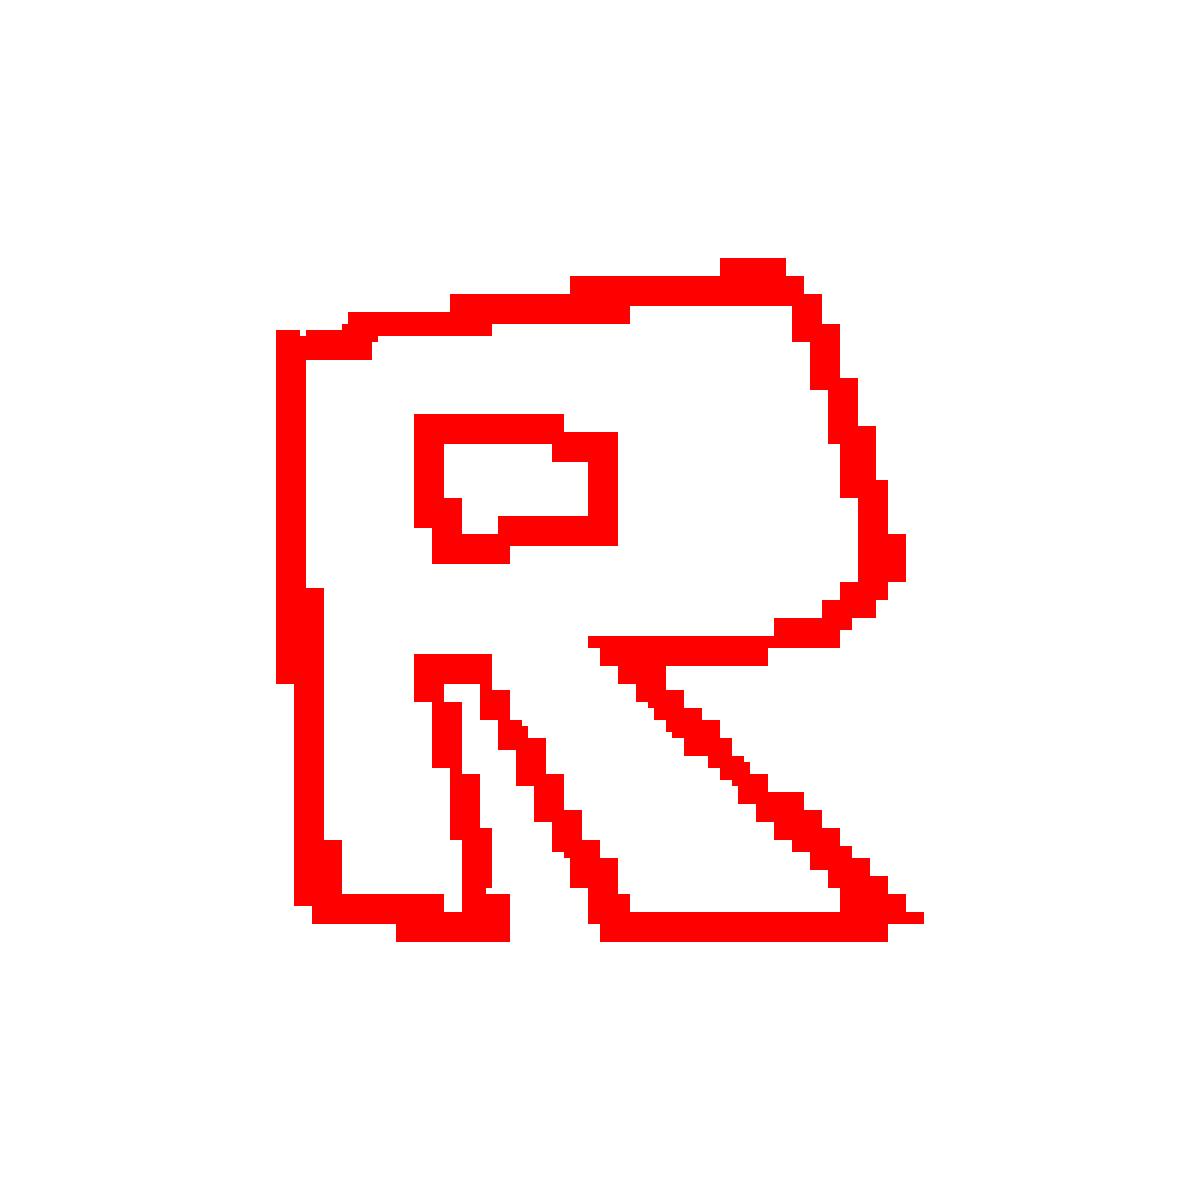 Old Roblox Logo - Pixilart - Old ROBLOX Logo by r3dgho5t